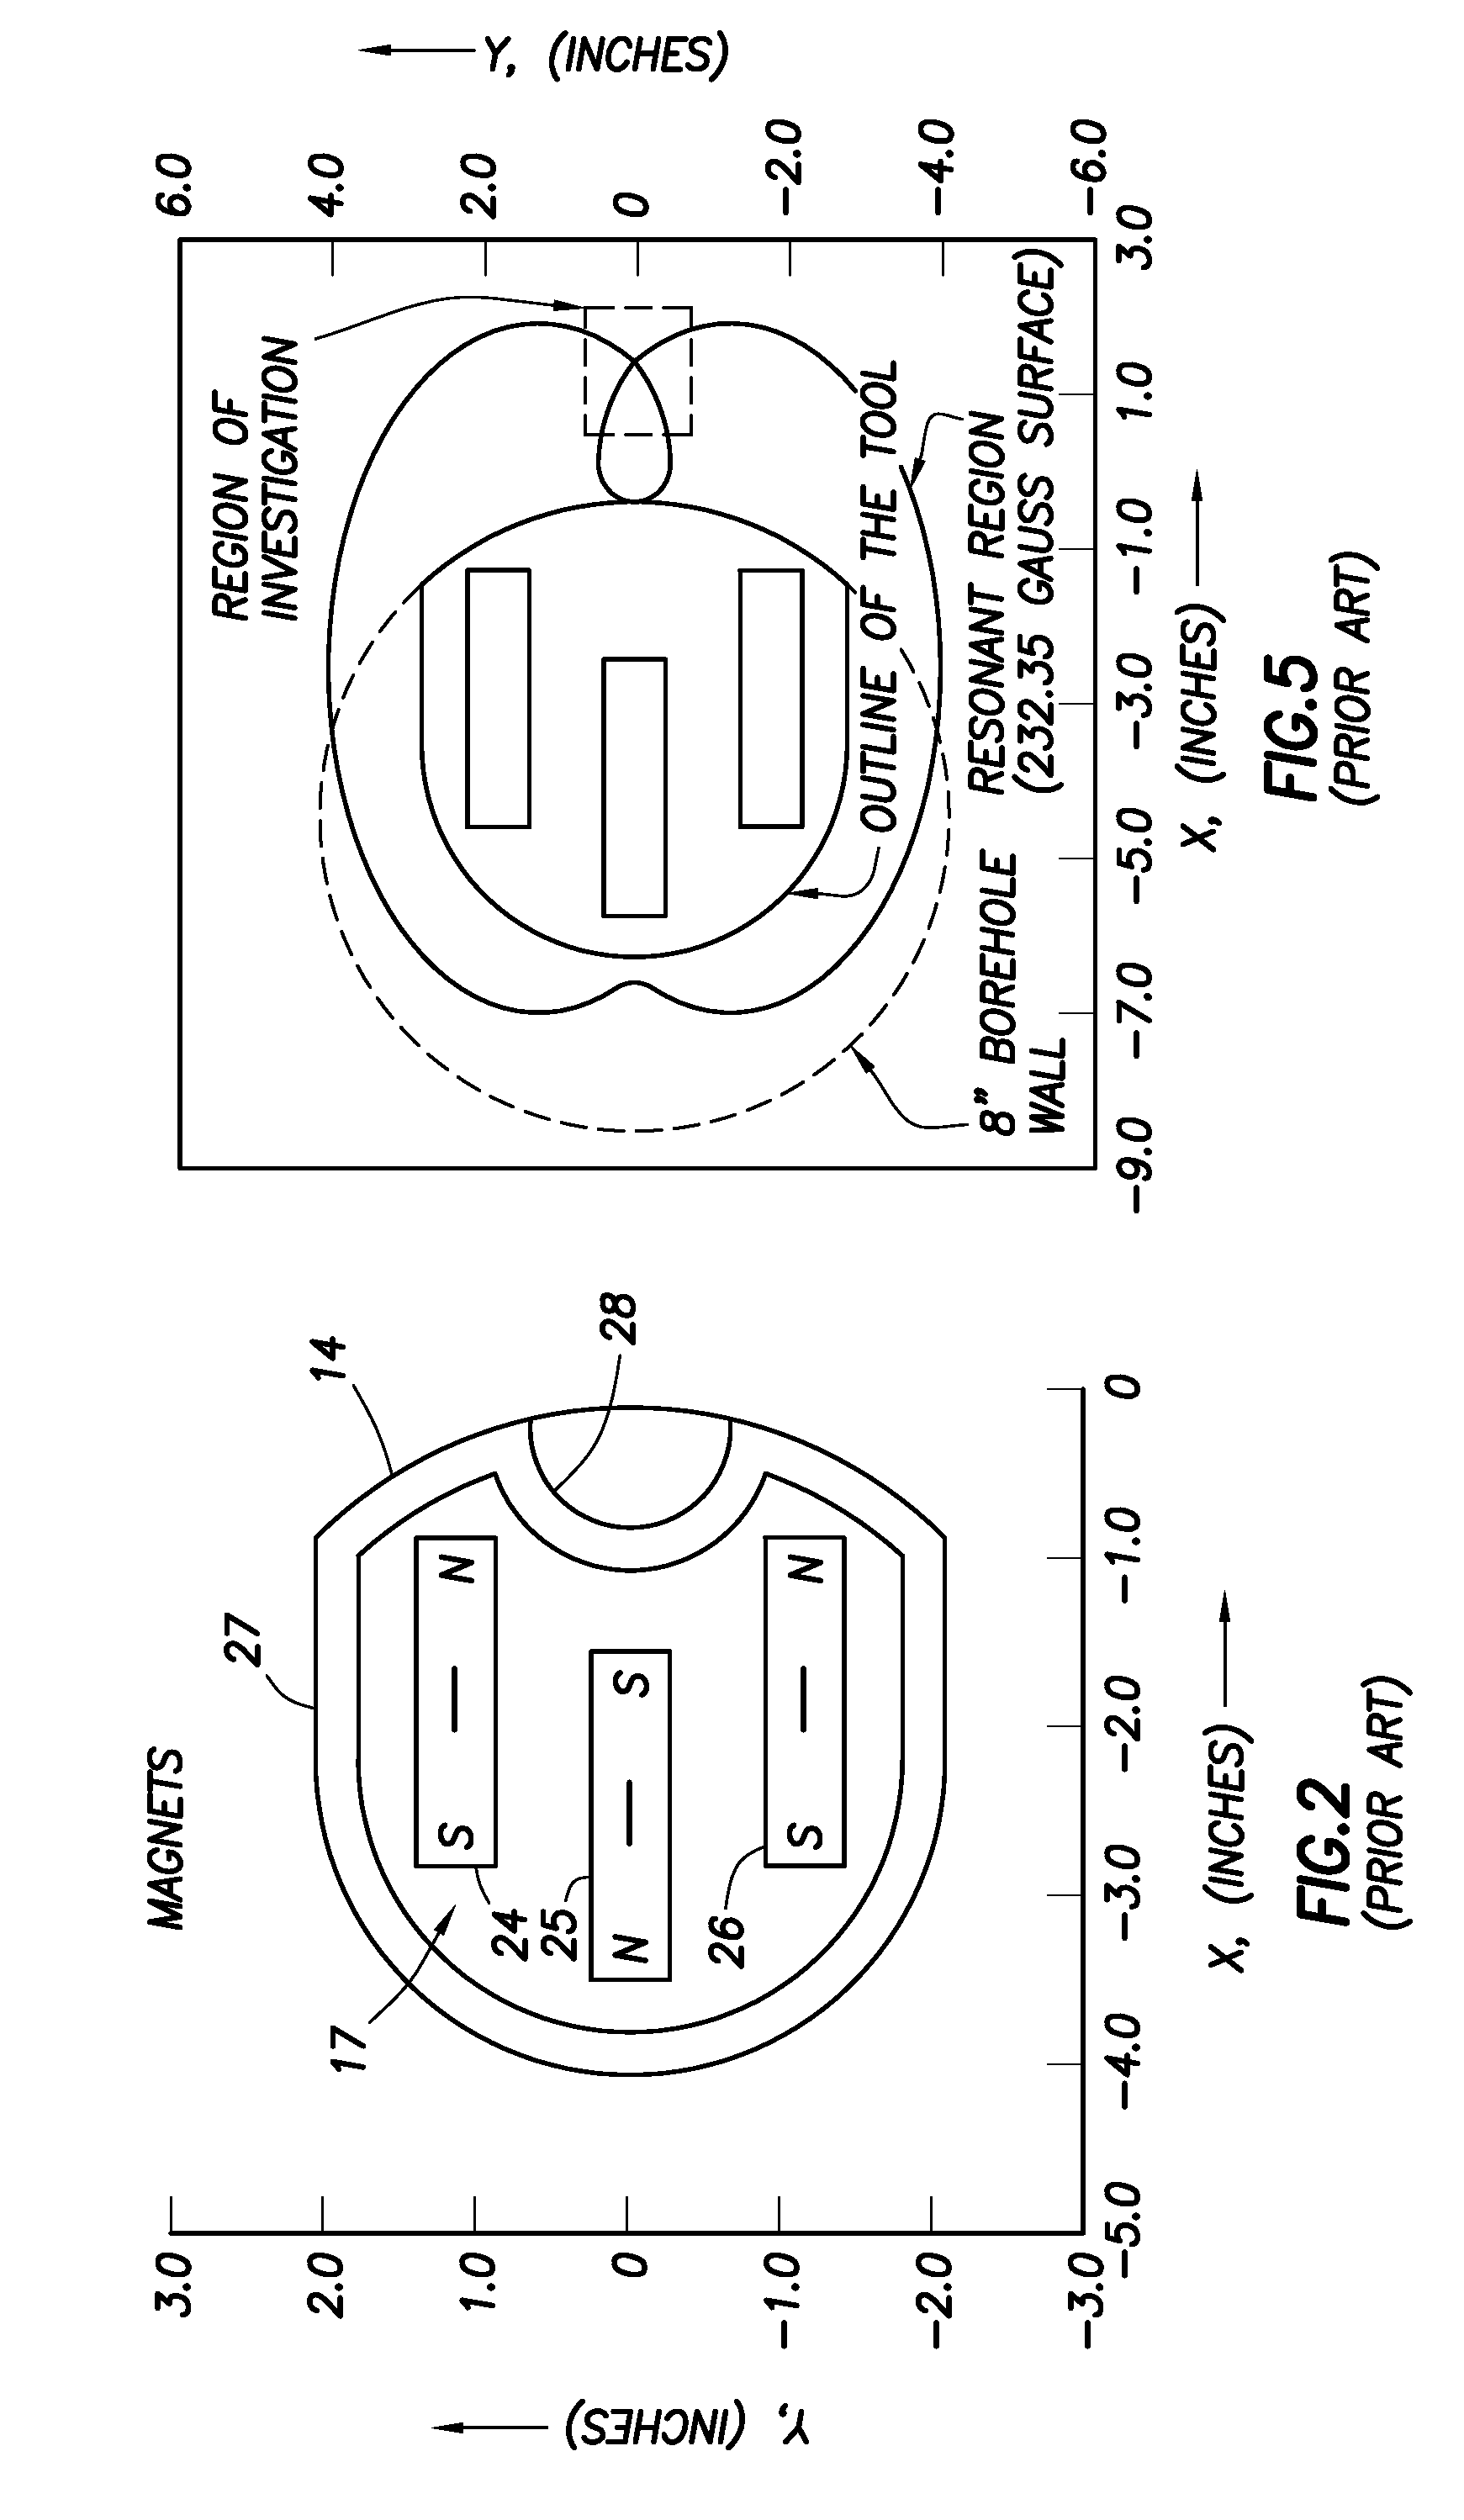 Method and Apparatus for Measuring Free Induction Decay Signal and Its Application to Composition Analysis